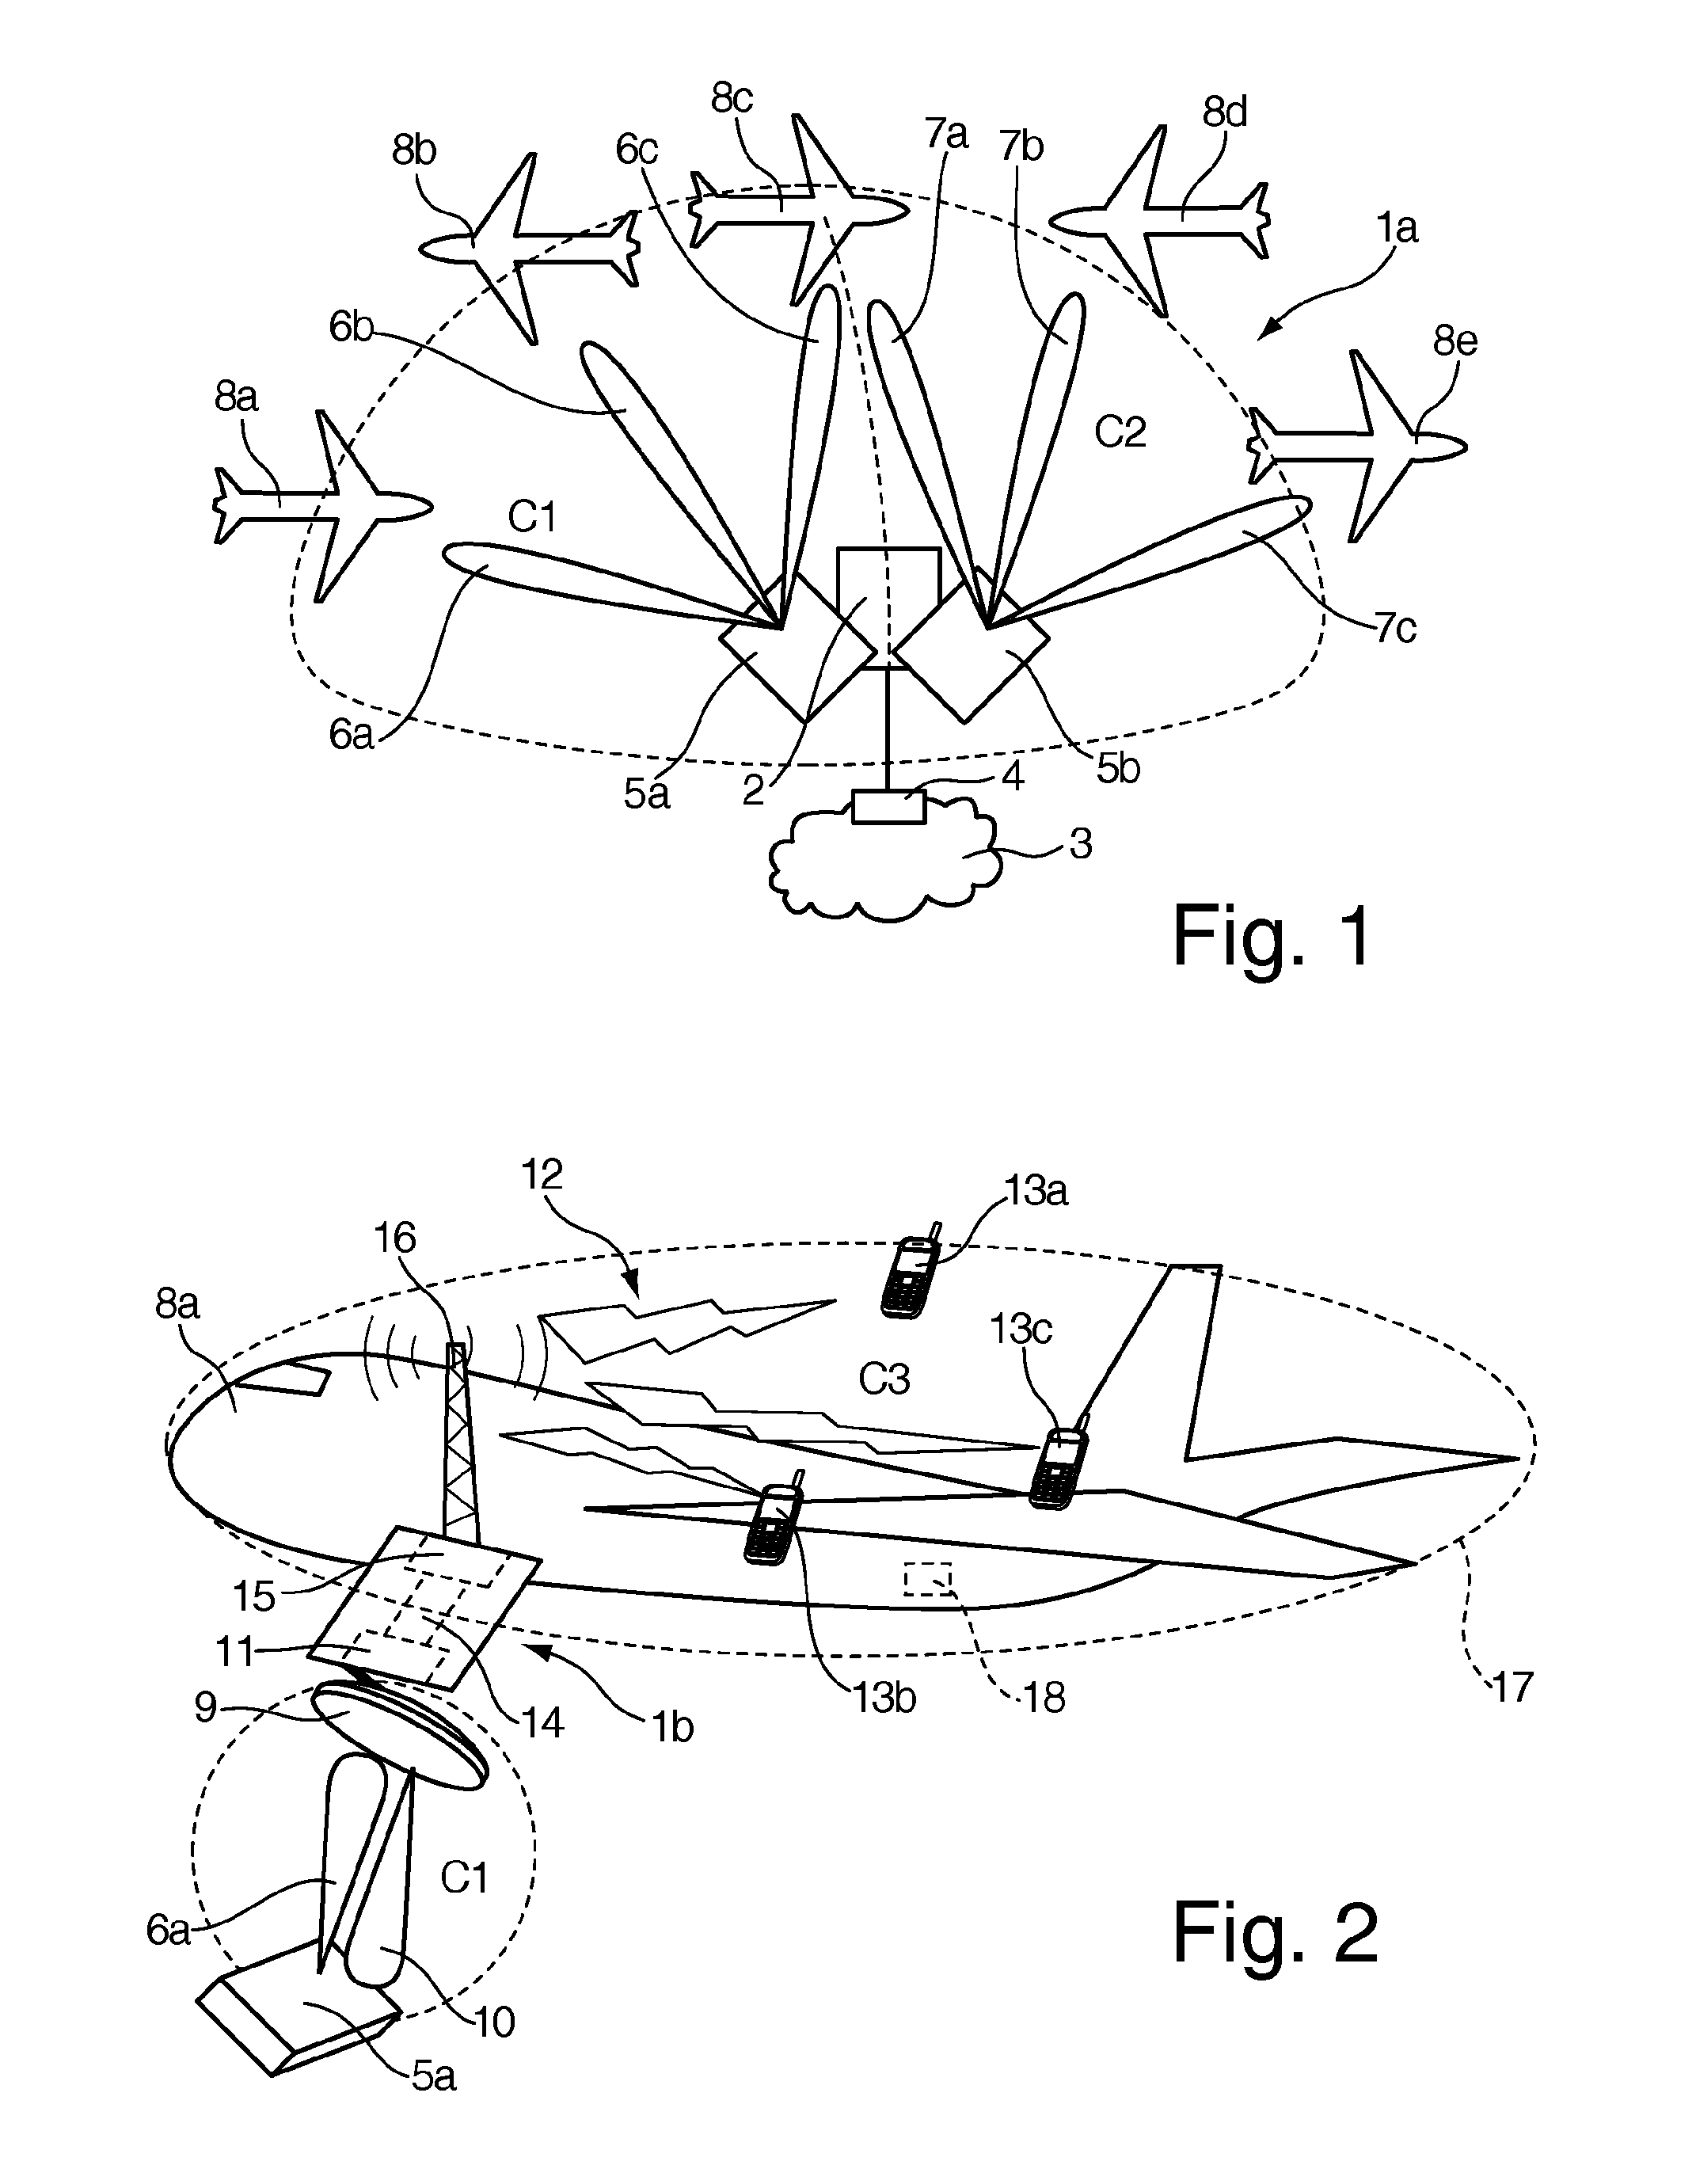 Systems and method for providing in-flight broadband mobile communication services